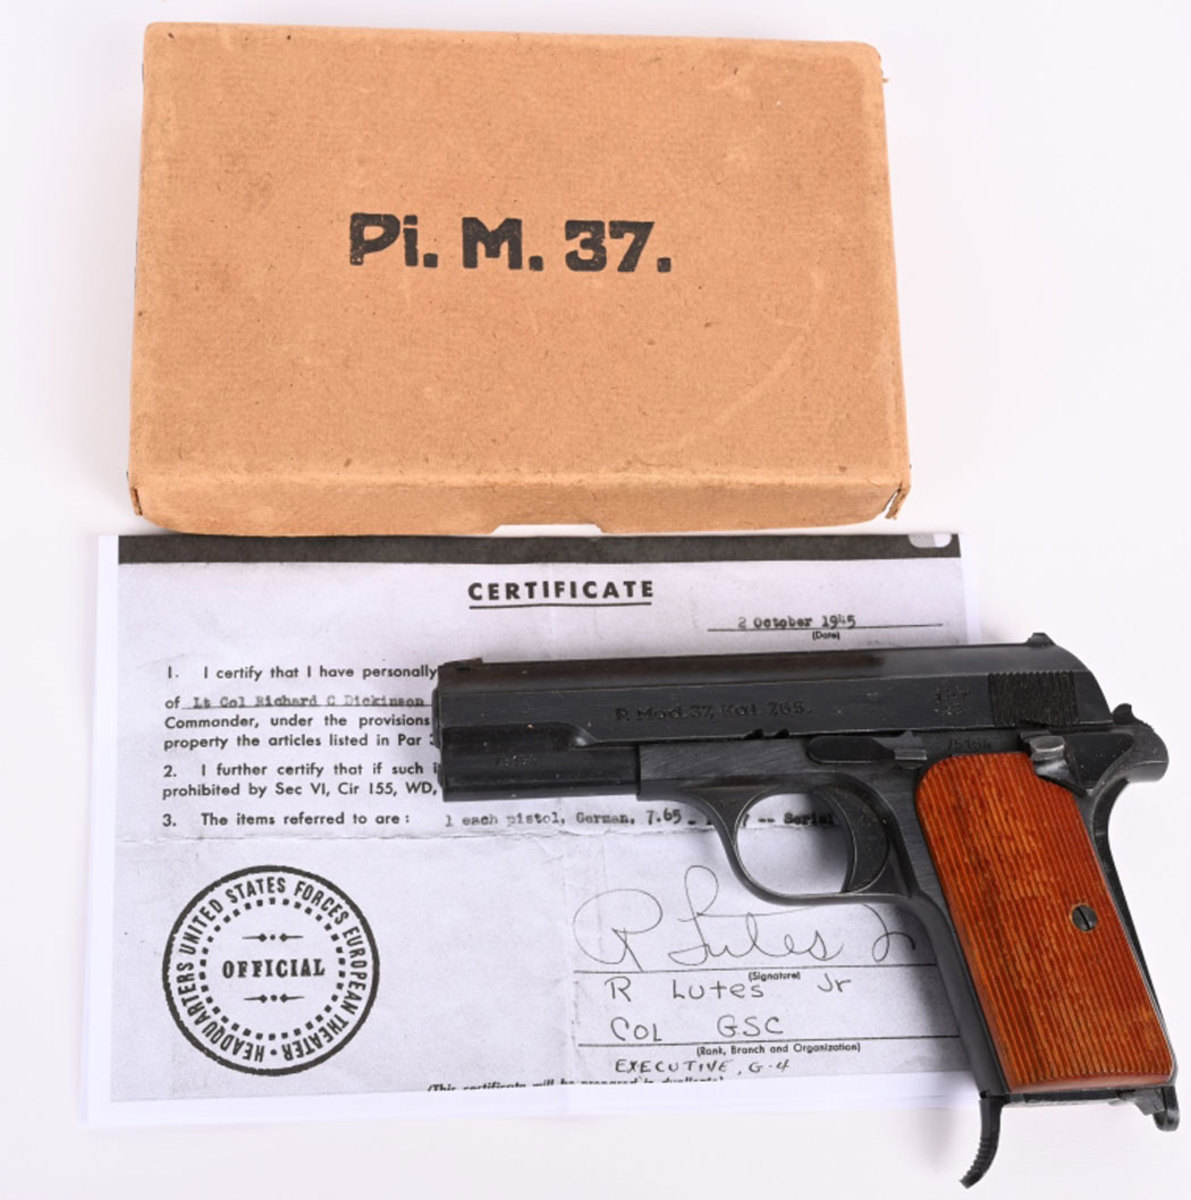 Captured Hungarian M37 Femaru Third Reich pistol in original box, manufactured under German occupation and redesigned with manual safety. This model was issued primarily to the Luftwaffe. Near-pristine condition and a recent discovery, never before offered at public sale.